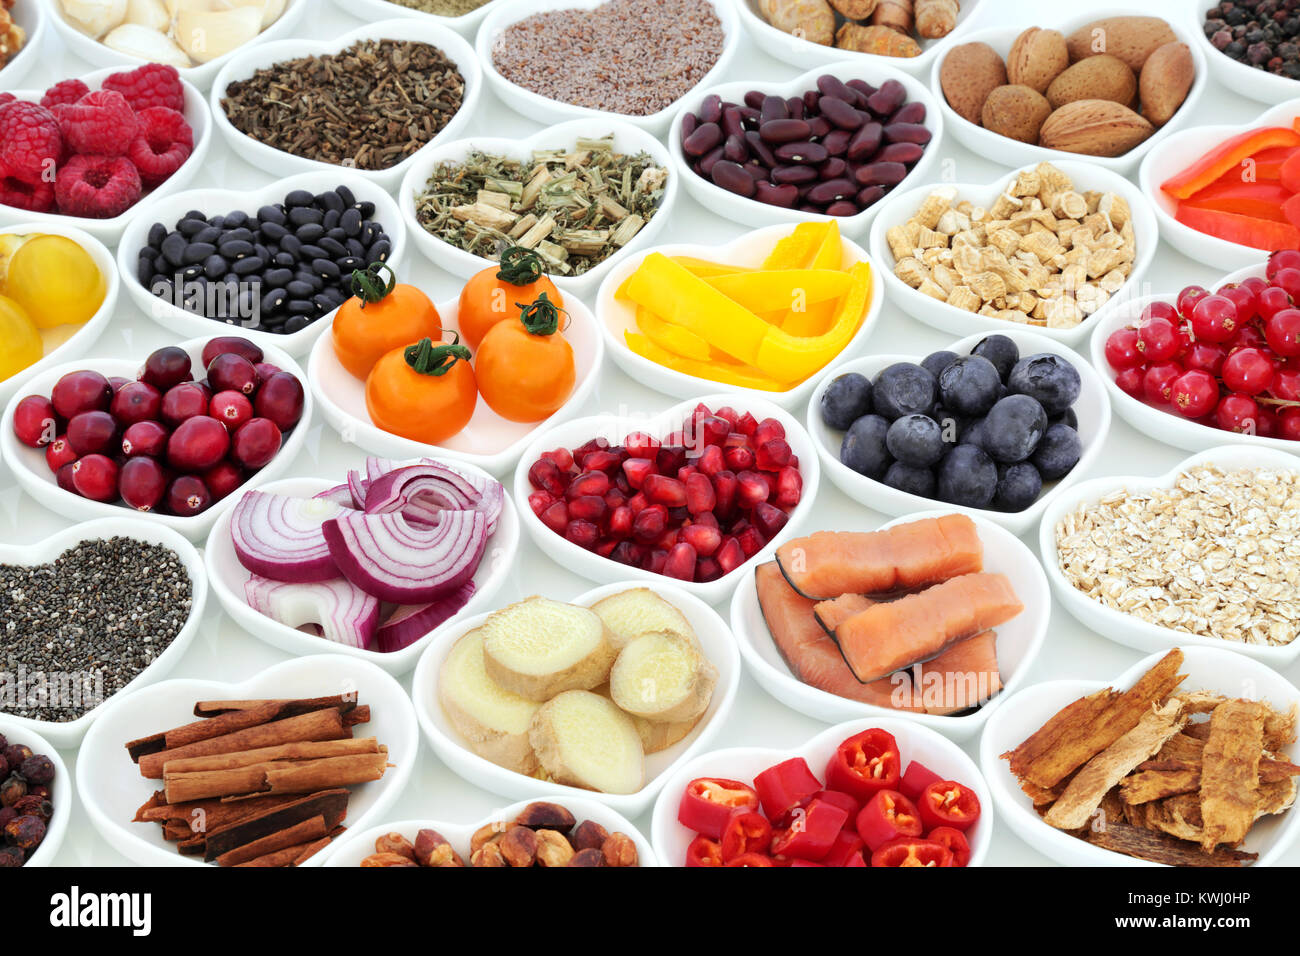 Super food nutrition for a healthy heart with fresh fruit, vegetables, fish, cereals, seeds, nuts. spice and herbal medicine. Stock Photo